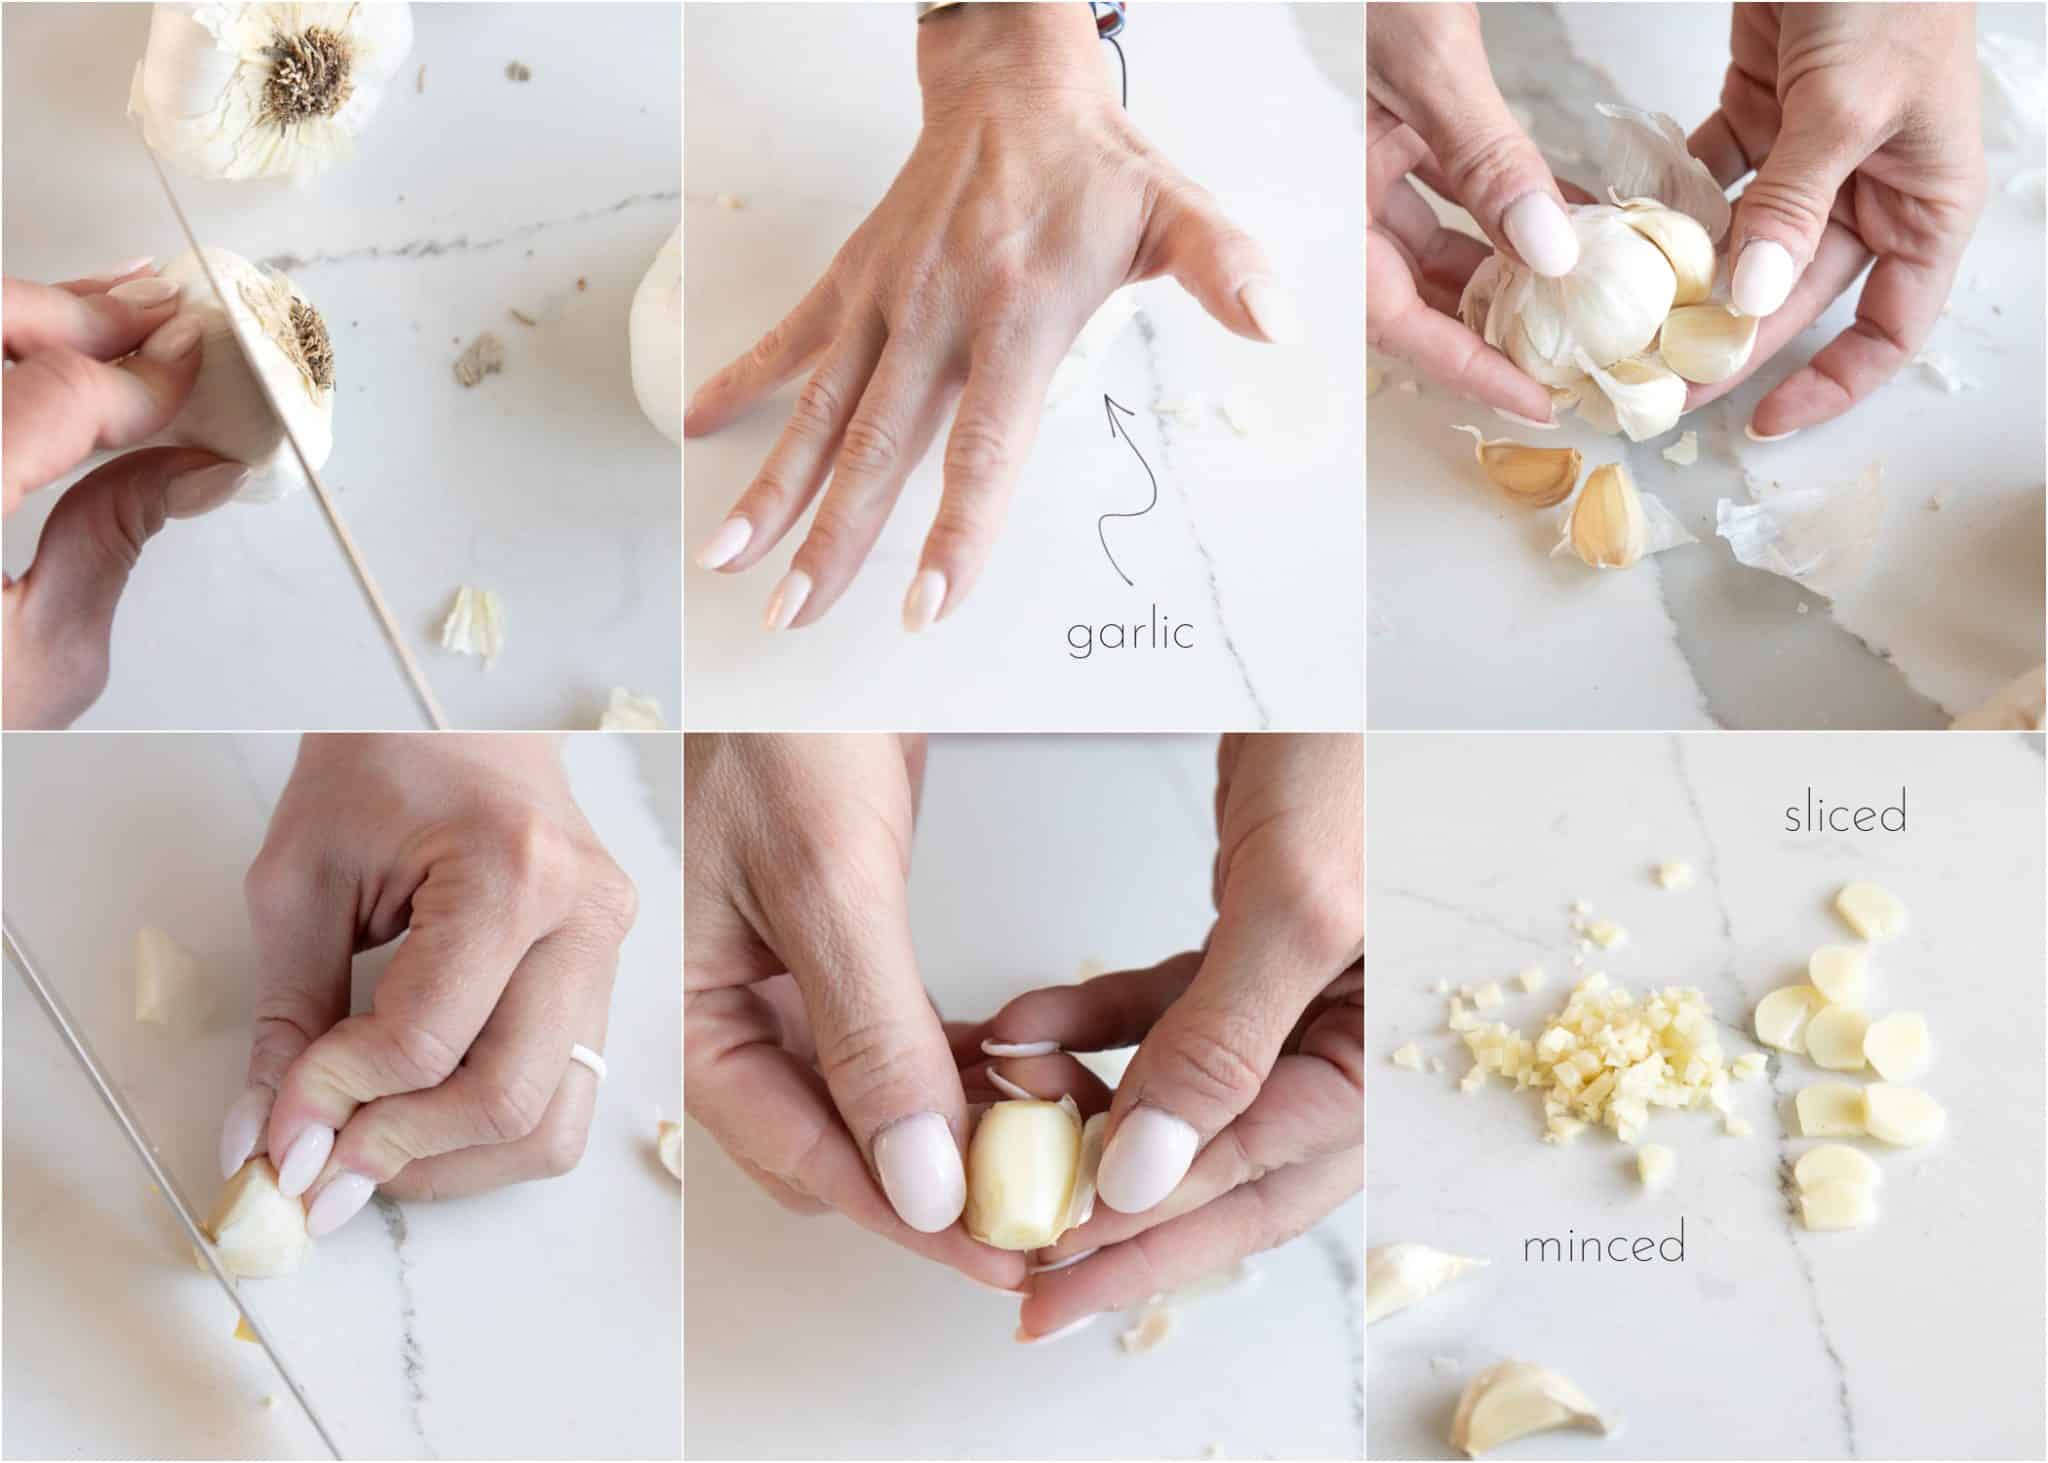 Collage of six images showing how to peel and mince garlic step-by-step.